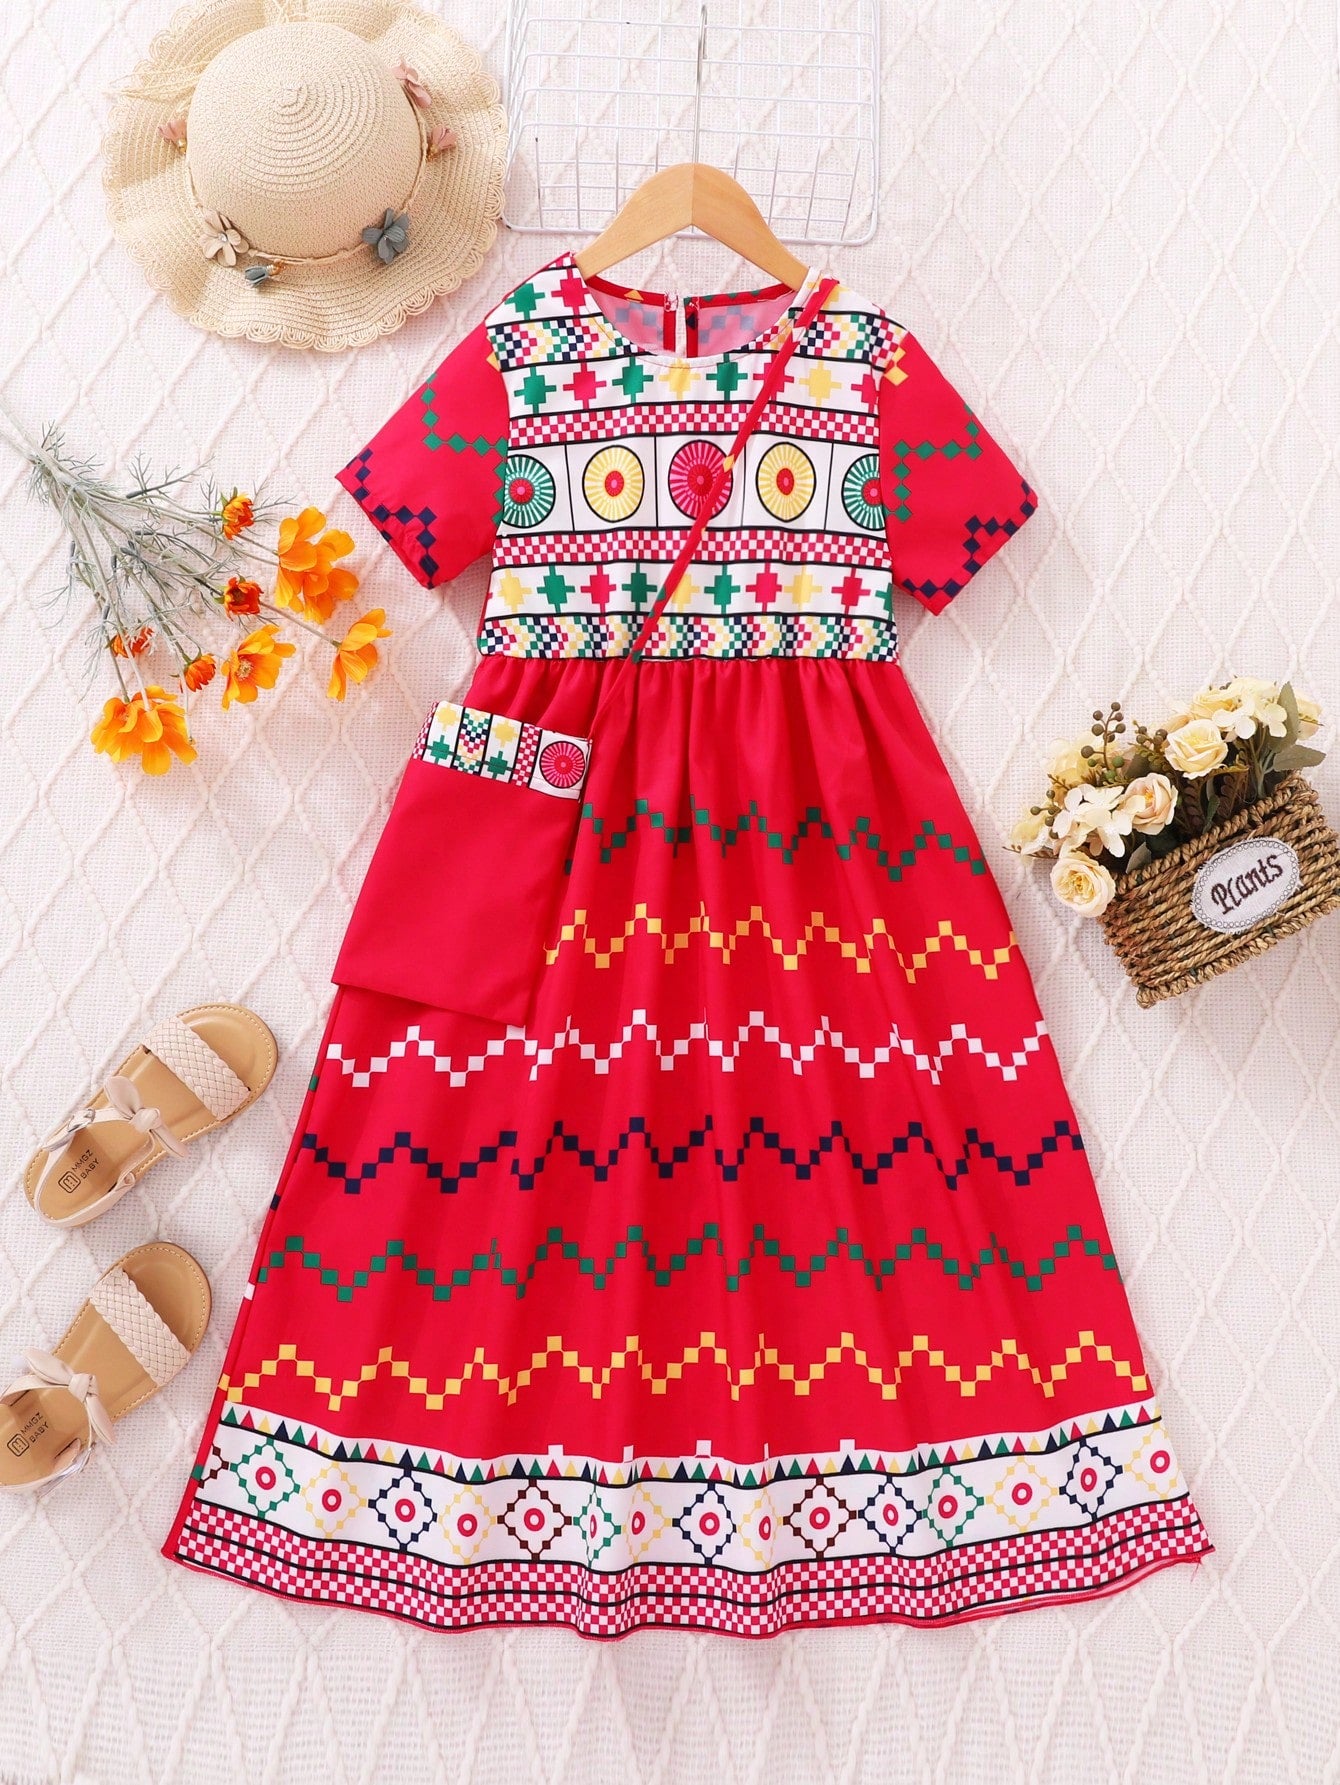 Young Girls' Geometric Printed Short Sleeve Party Dress, Summer